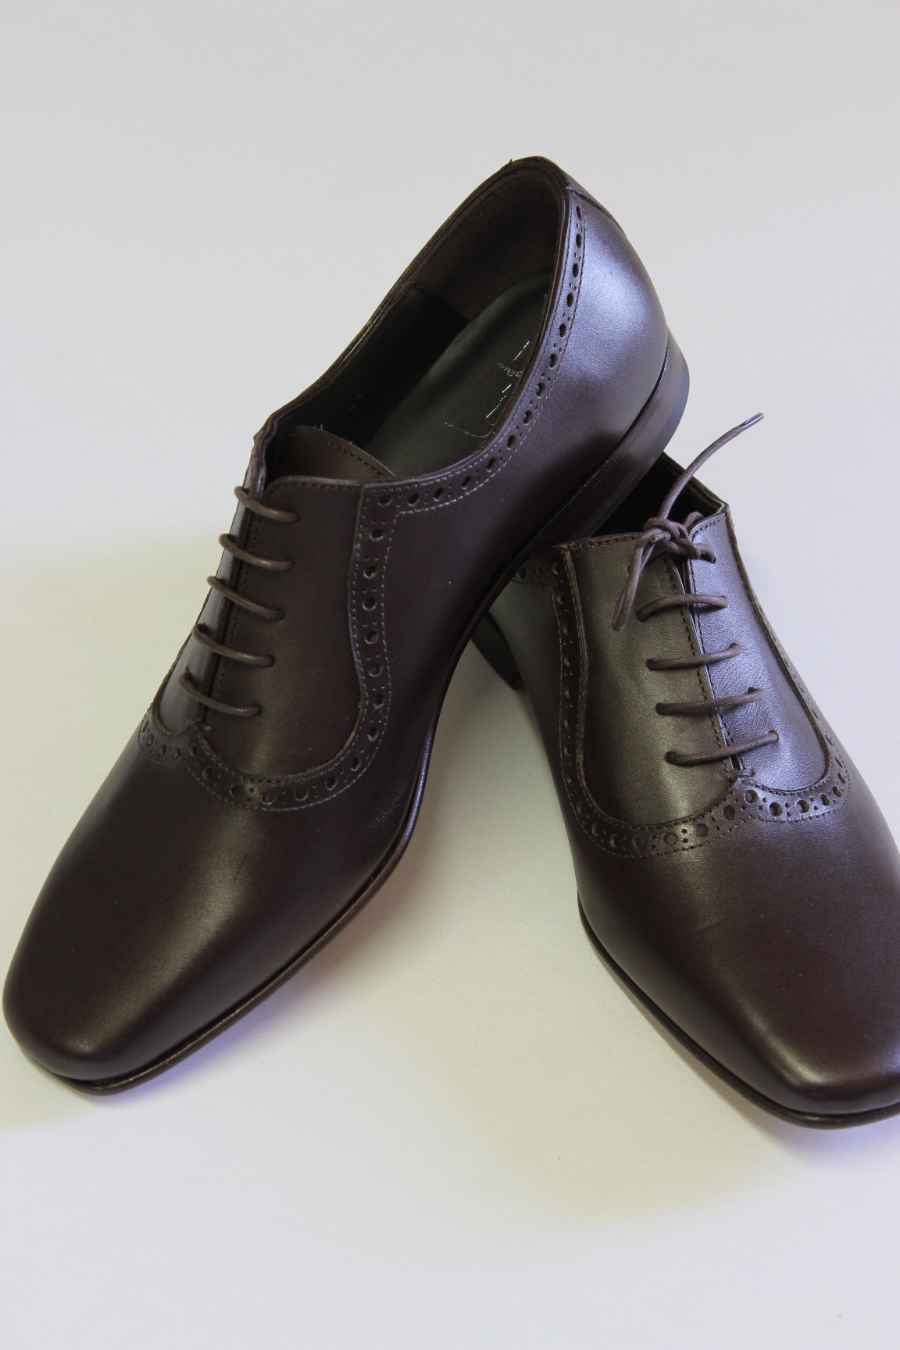 dna dnagroove shoes oxfords calf leather artisan made made in Spain